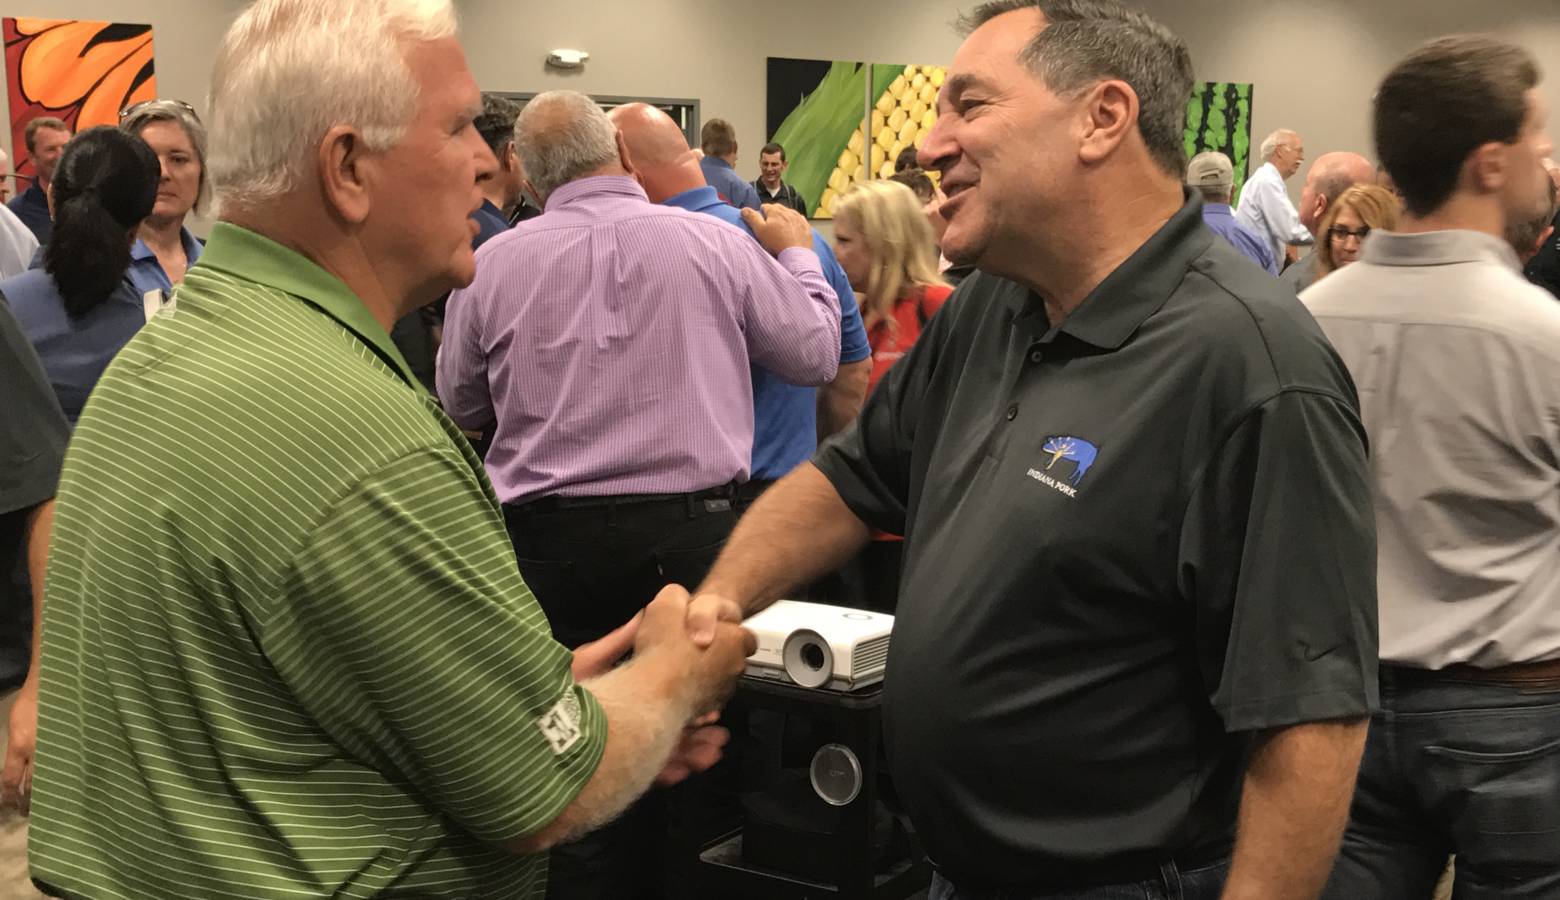 U.S. Sen. Joe Donnelly (D-Indiana), center, speaks with a constituent at the Indiana State Fair (Brandon Smith/IPB News)